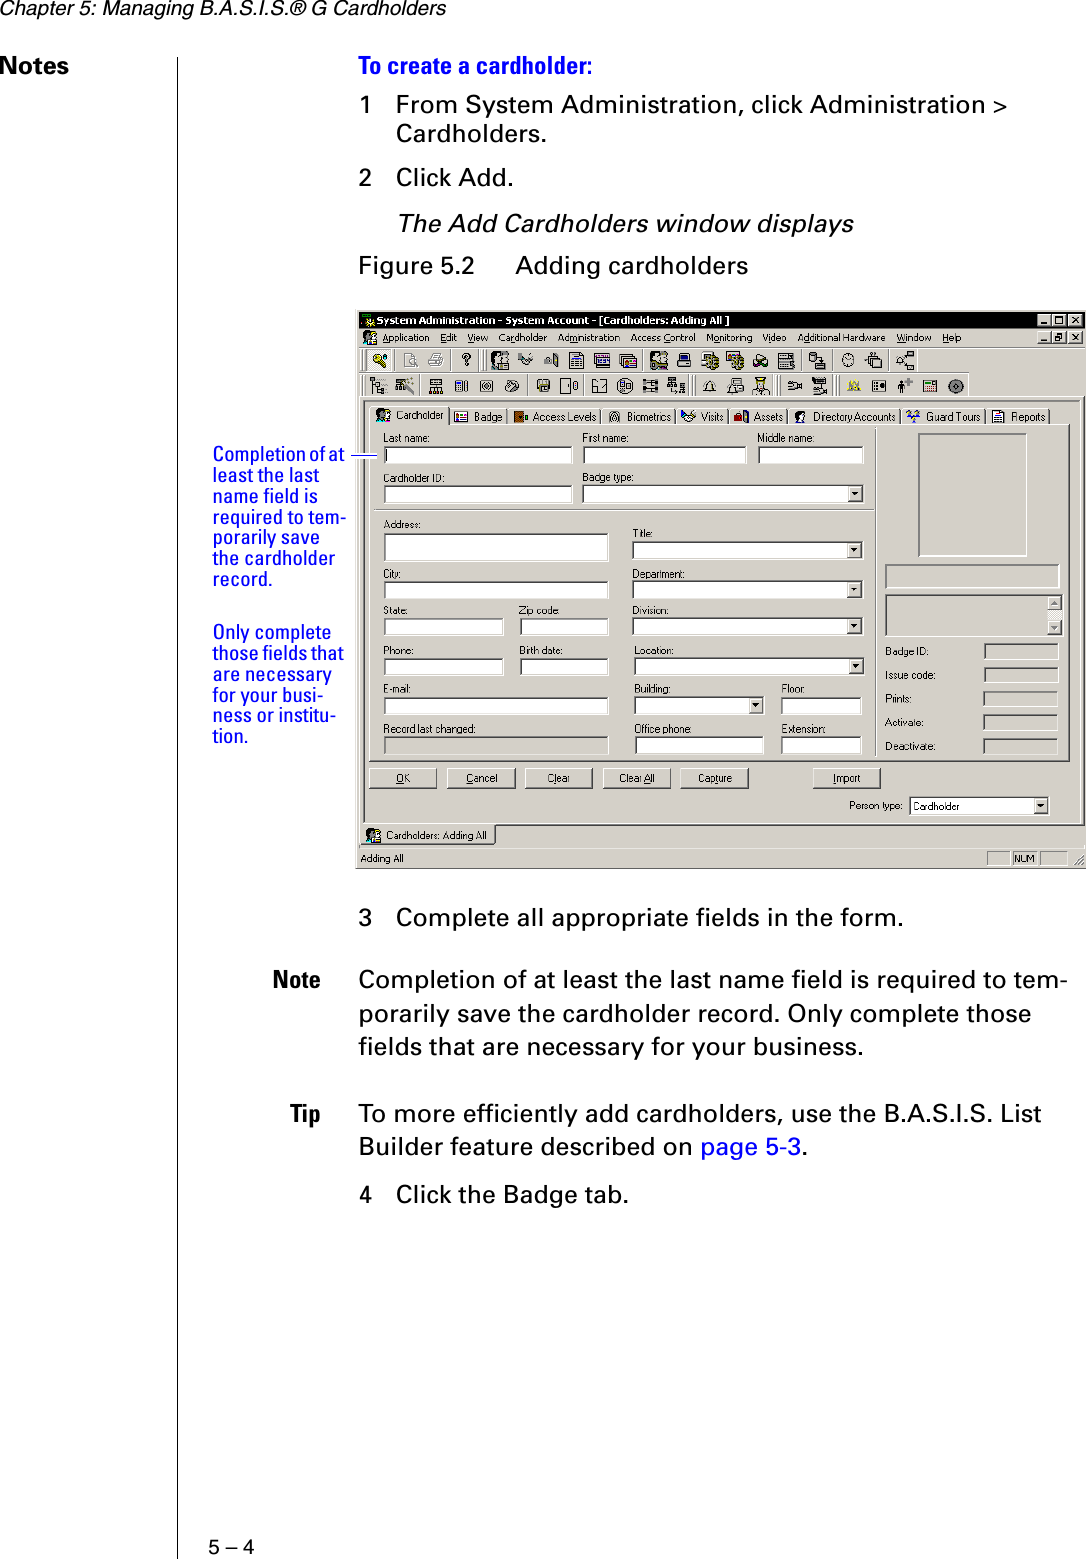 Chapter 5: Managing B.A.S.I.S.® G Cardholders5 – 4Notes To create a cardholder:1 From System Administration, click Administration &gt; Cardholders.2 Click Add.The Add Cardholders window displays 3 Complete all appropriate fields in the form.Note Completion of at least the last name field is required to tem-porarily save the cardholder record. Only complete those fields that are necessary for your business.Tip To more efficiently add cardholders, use the B.A.S.I.S. List Builder feature described on page 5-3.4 Click the Badge tab.Figure 5.2  Adding cardholdersCompletion of at least the last name field is required to tem-porarily save the cardholder record.Only complete those fields that are necessary for your busi-ness or institu-tion.